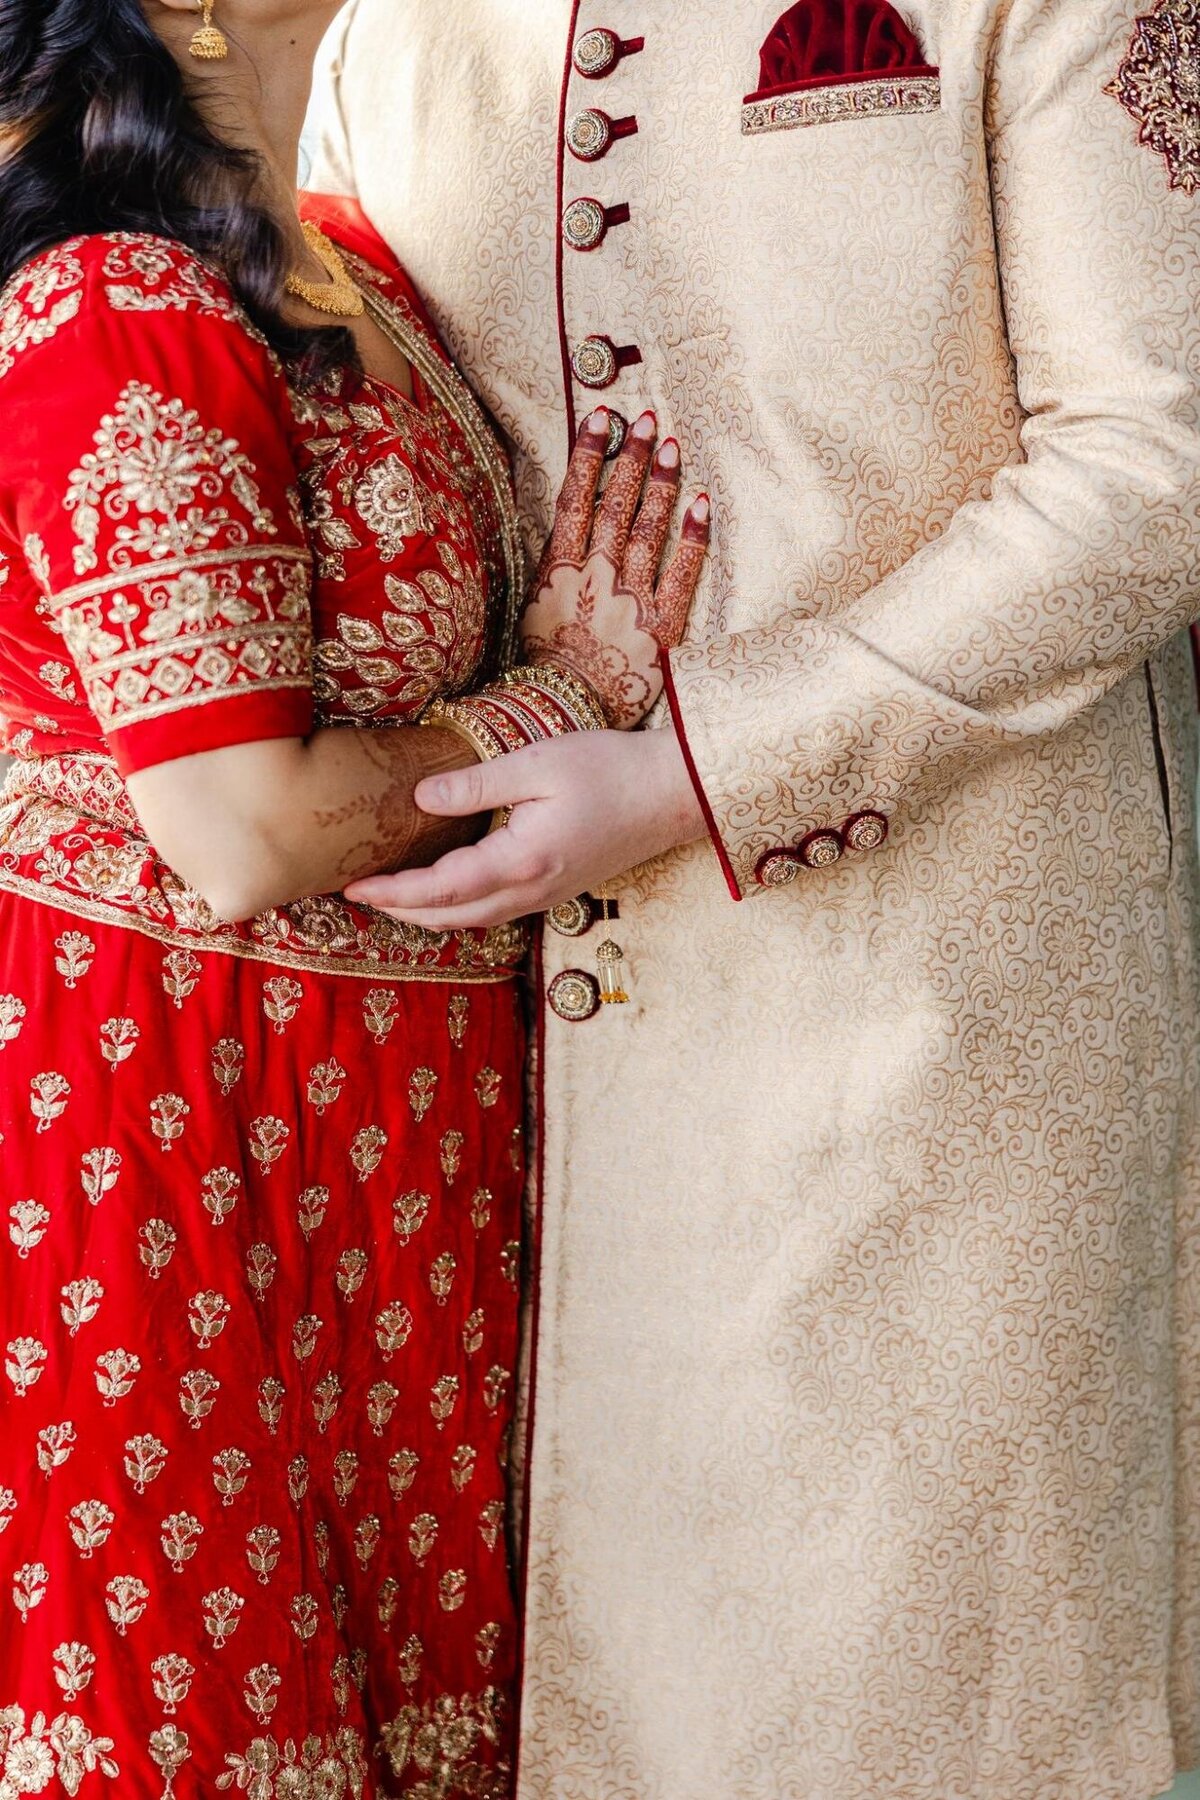 A bride in a red embroidered dress and henna on her hands holds onto a groom wearing a cream-colored, ornate sherwani.